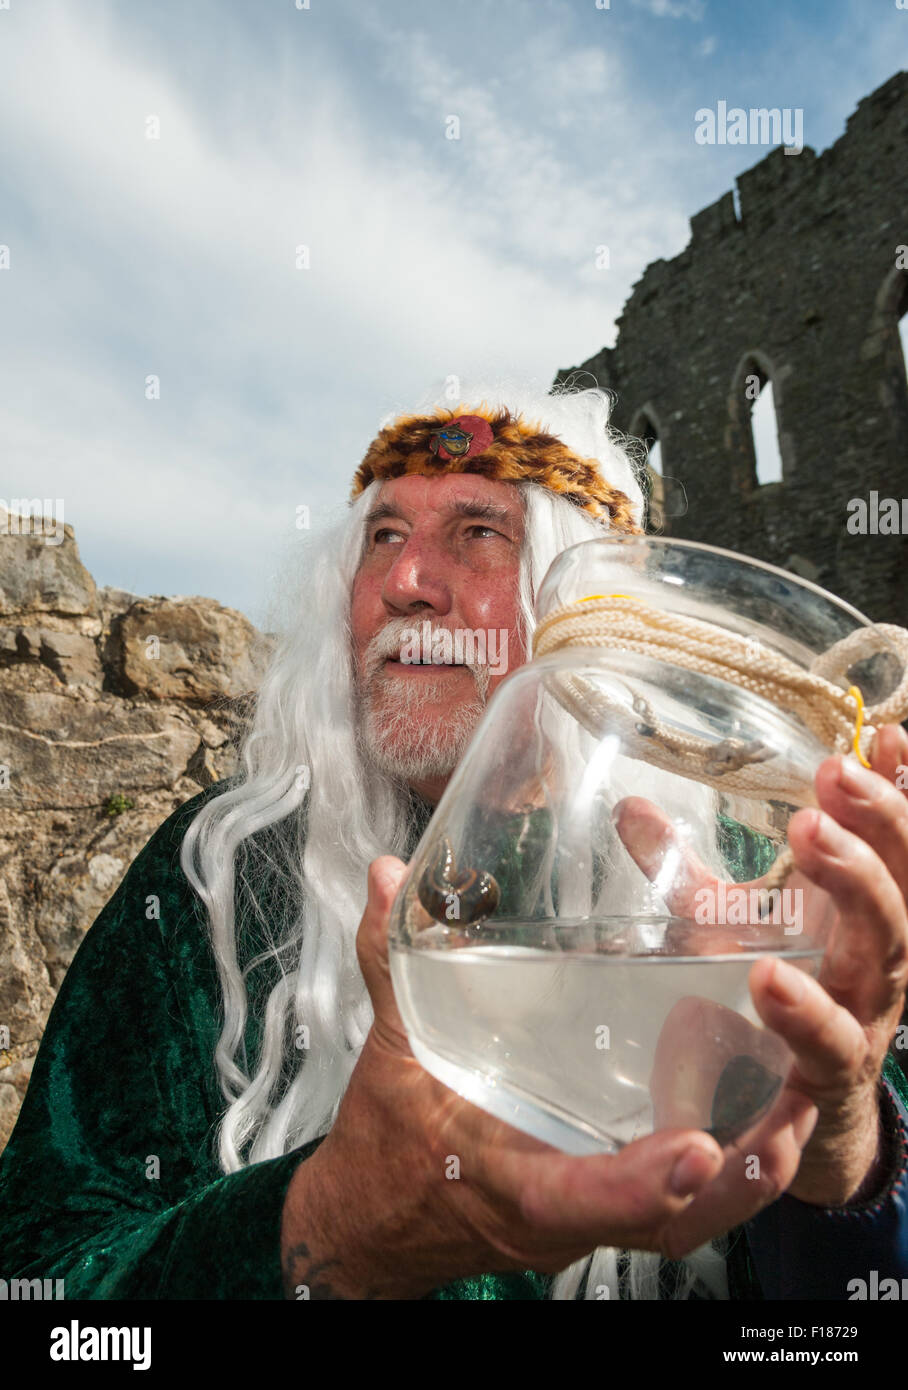 South Wales, UK, Saturday 29 August 2015. The 3rd annual Medieval Fair at Kidwelly Castle, near Llanelli, Carmarthenshire, Wales, UK. Pictured is Bob Edwards, 'Apothecary', with one of the tools of his trade, a leach, at Kidwelly Castle during bank holiday weekend. Credit:  Algis Motuza/Alamy Live News Stock Photo